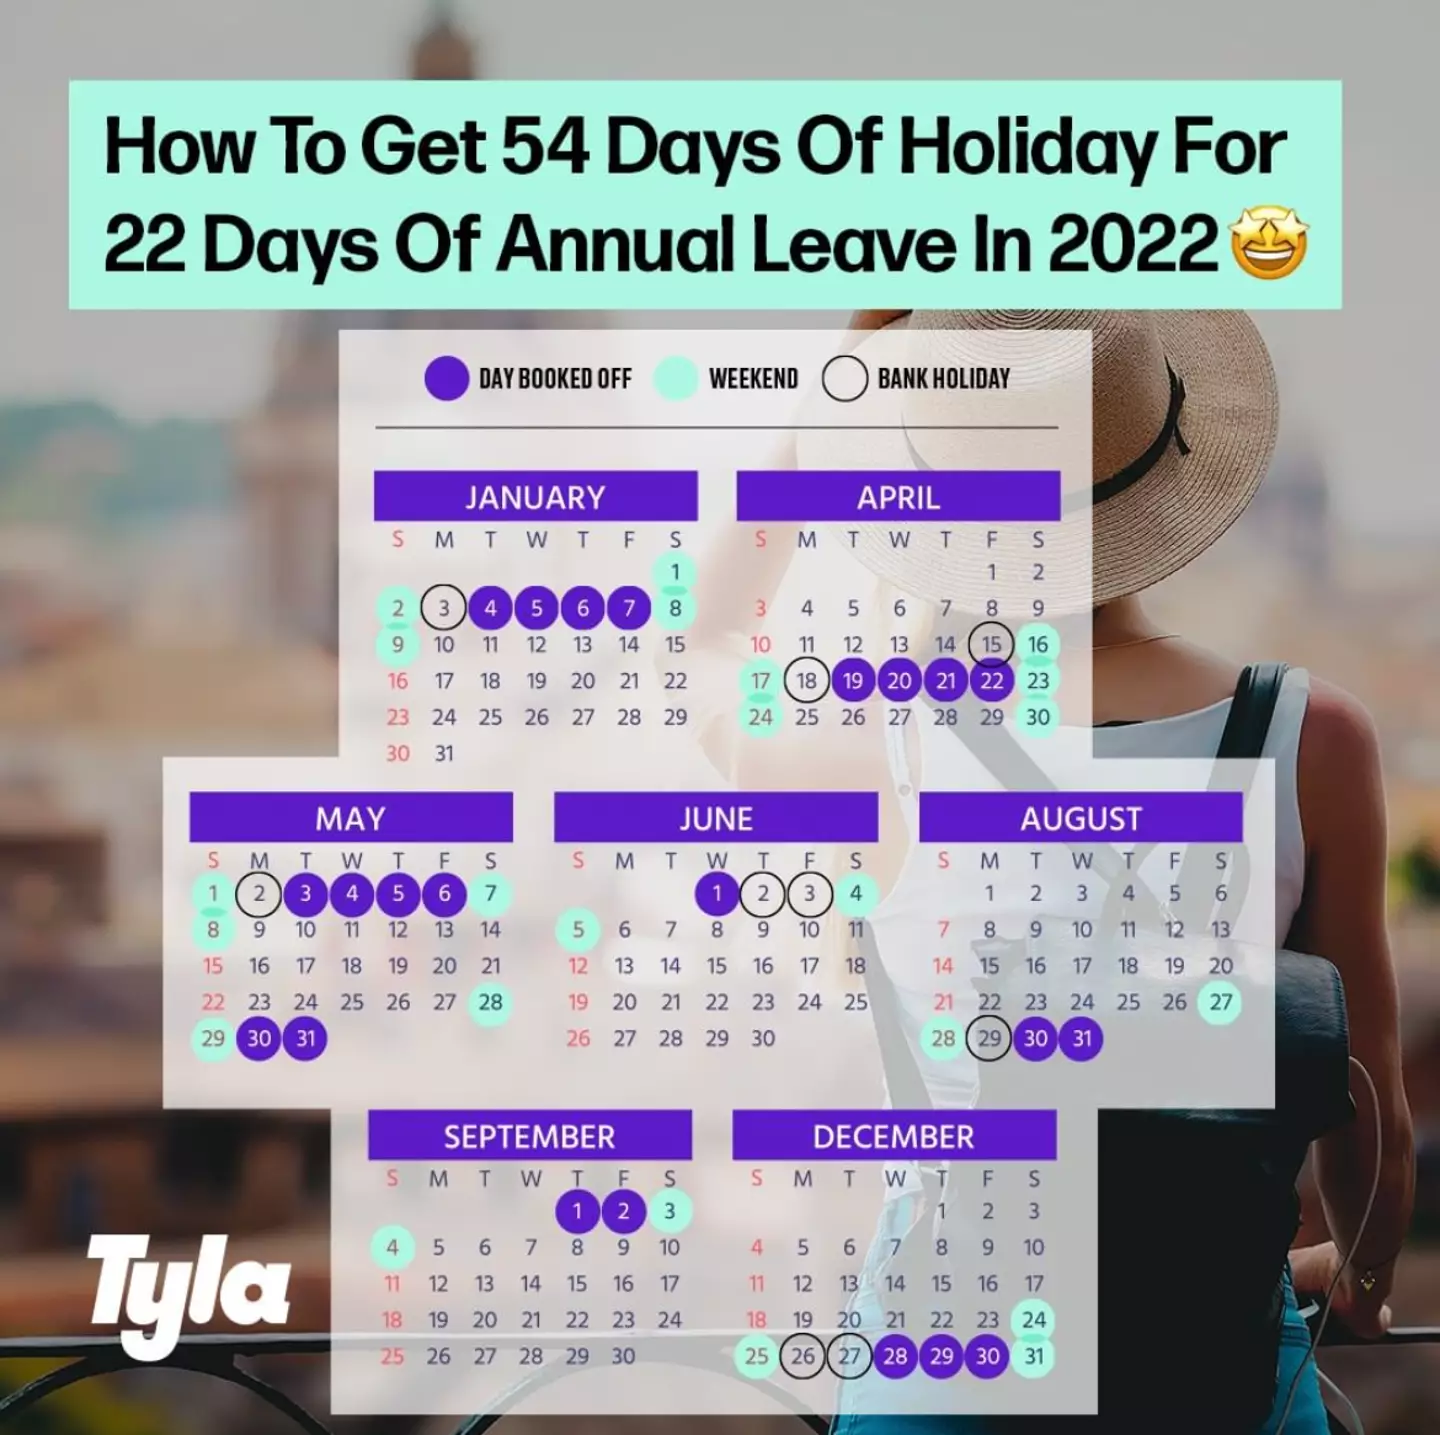 You can get 54 days of annual leave (